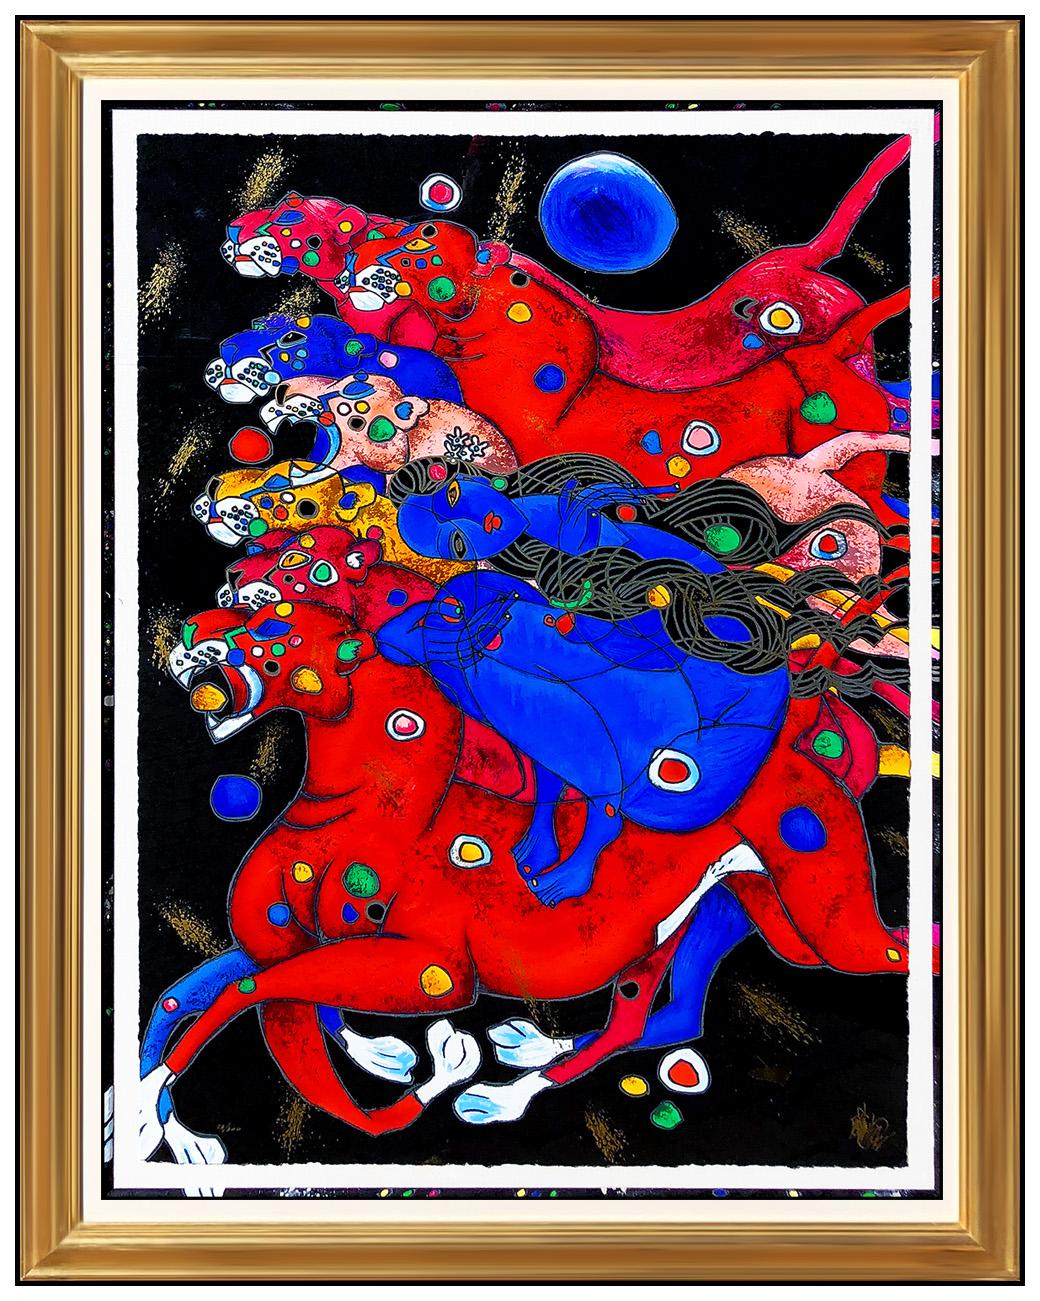 Jiang Authentic and Original Color Serigraph "Panthers", Professionally Custom Framed and listed with the Submit Best Offer option

Accepting Offers Now:  Up for sale we have a Brilliant Serigraph by renowned Modern Artist, Jiang Tie Feng, titled